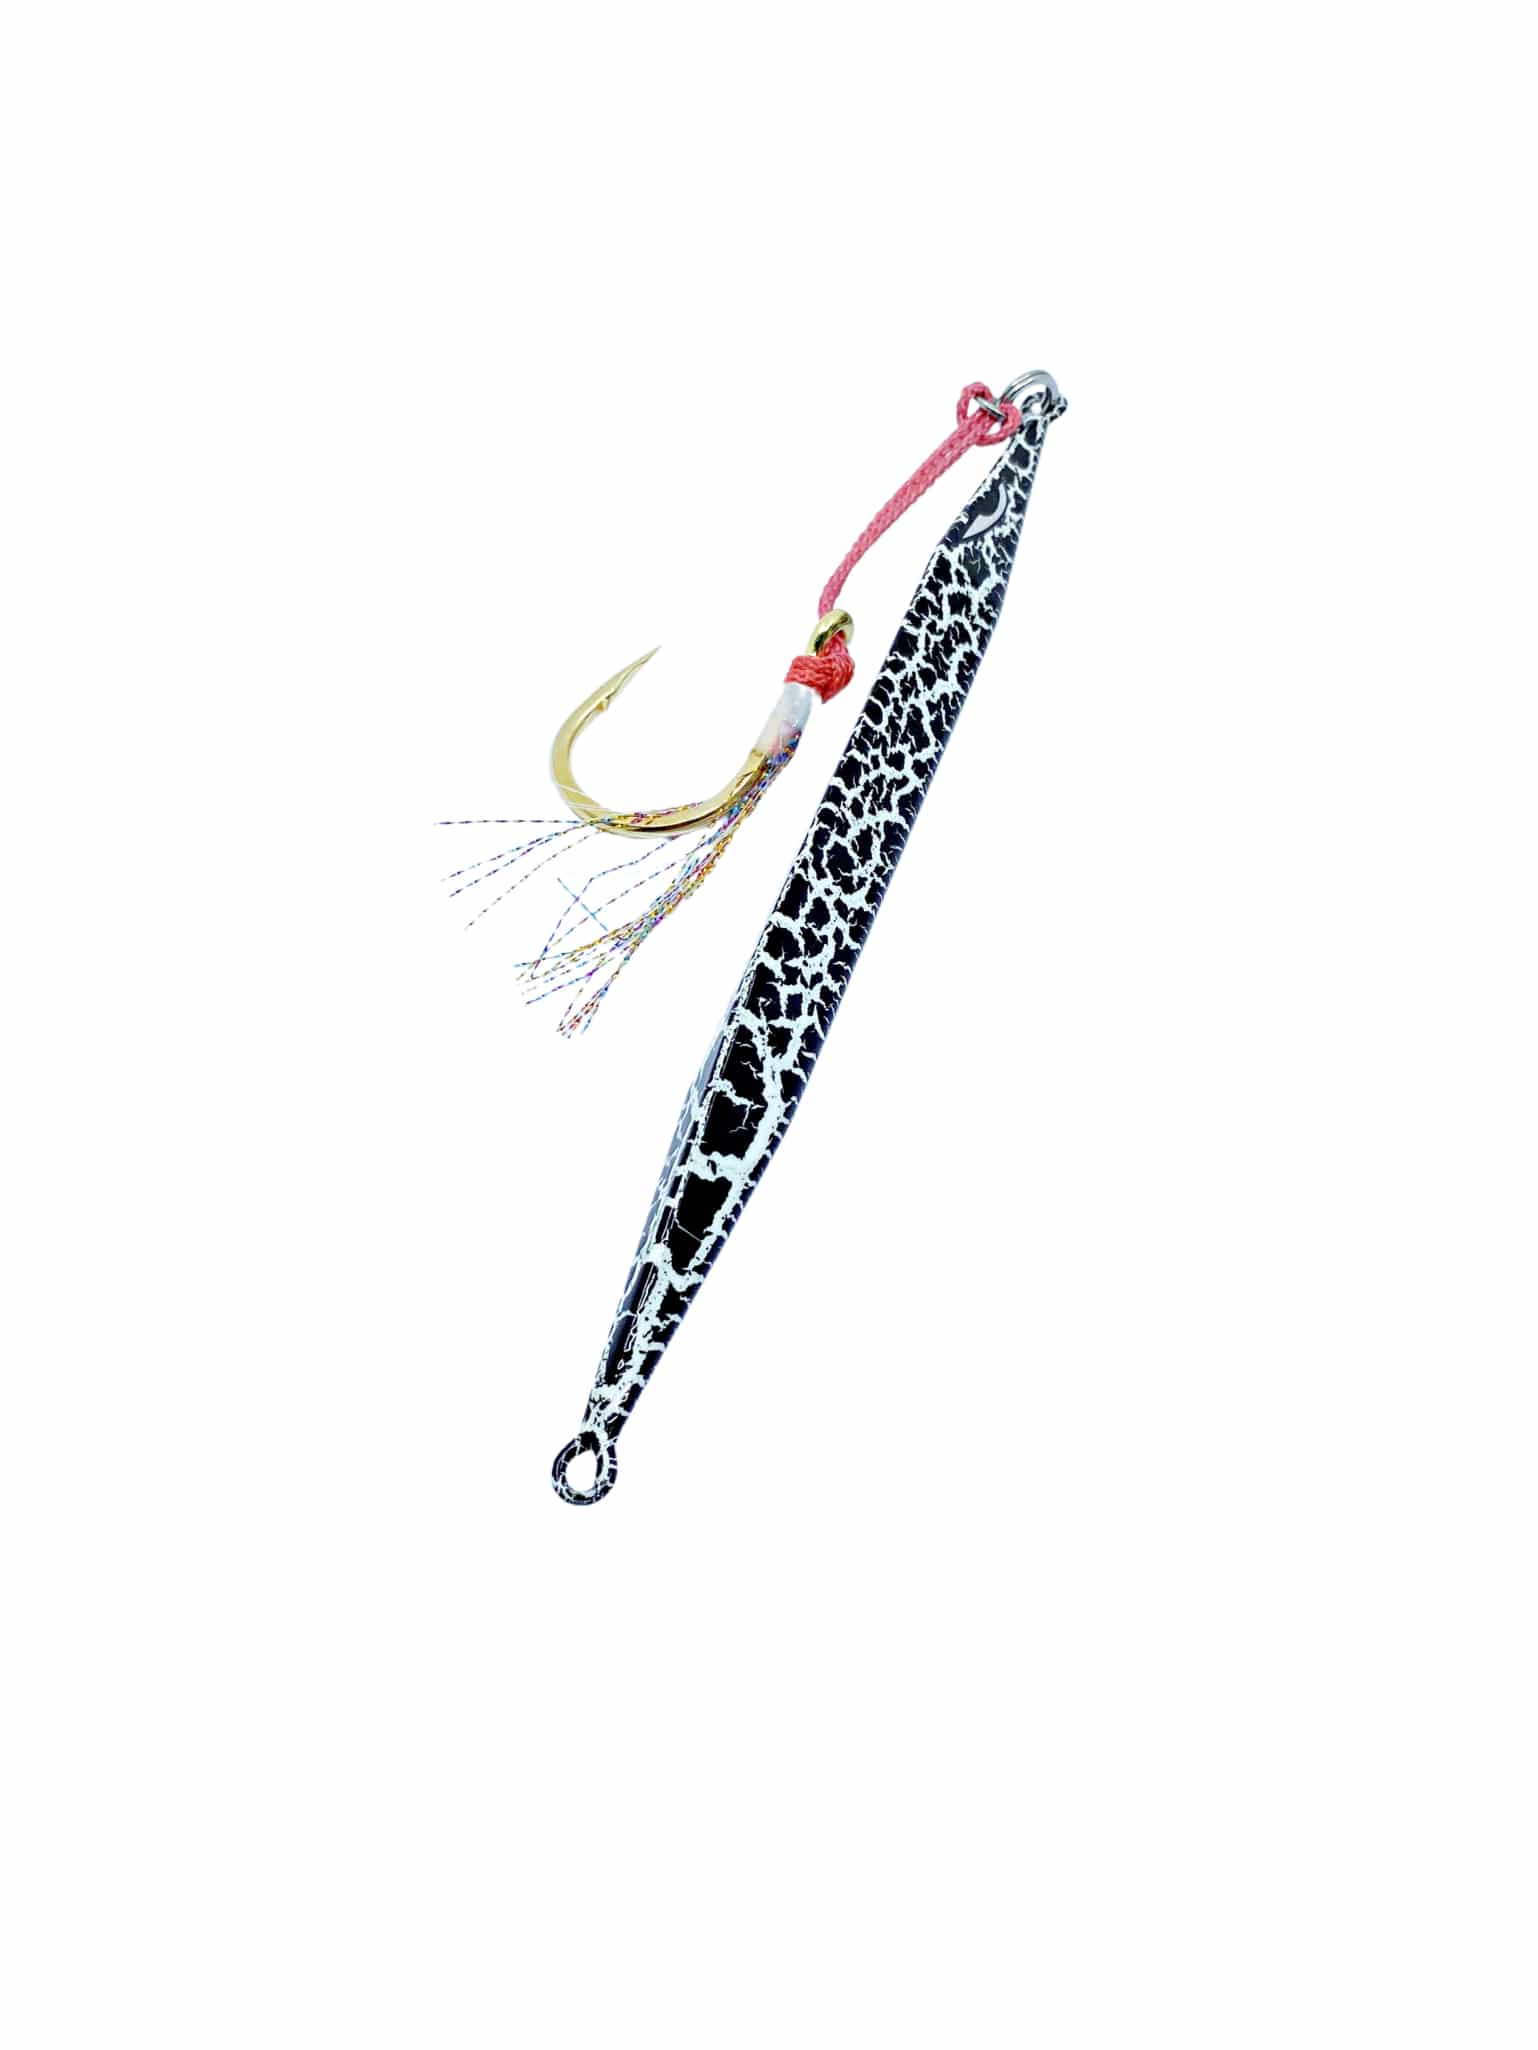 CATCH Double Trouble Jigging Lure